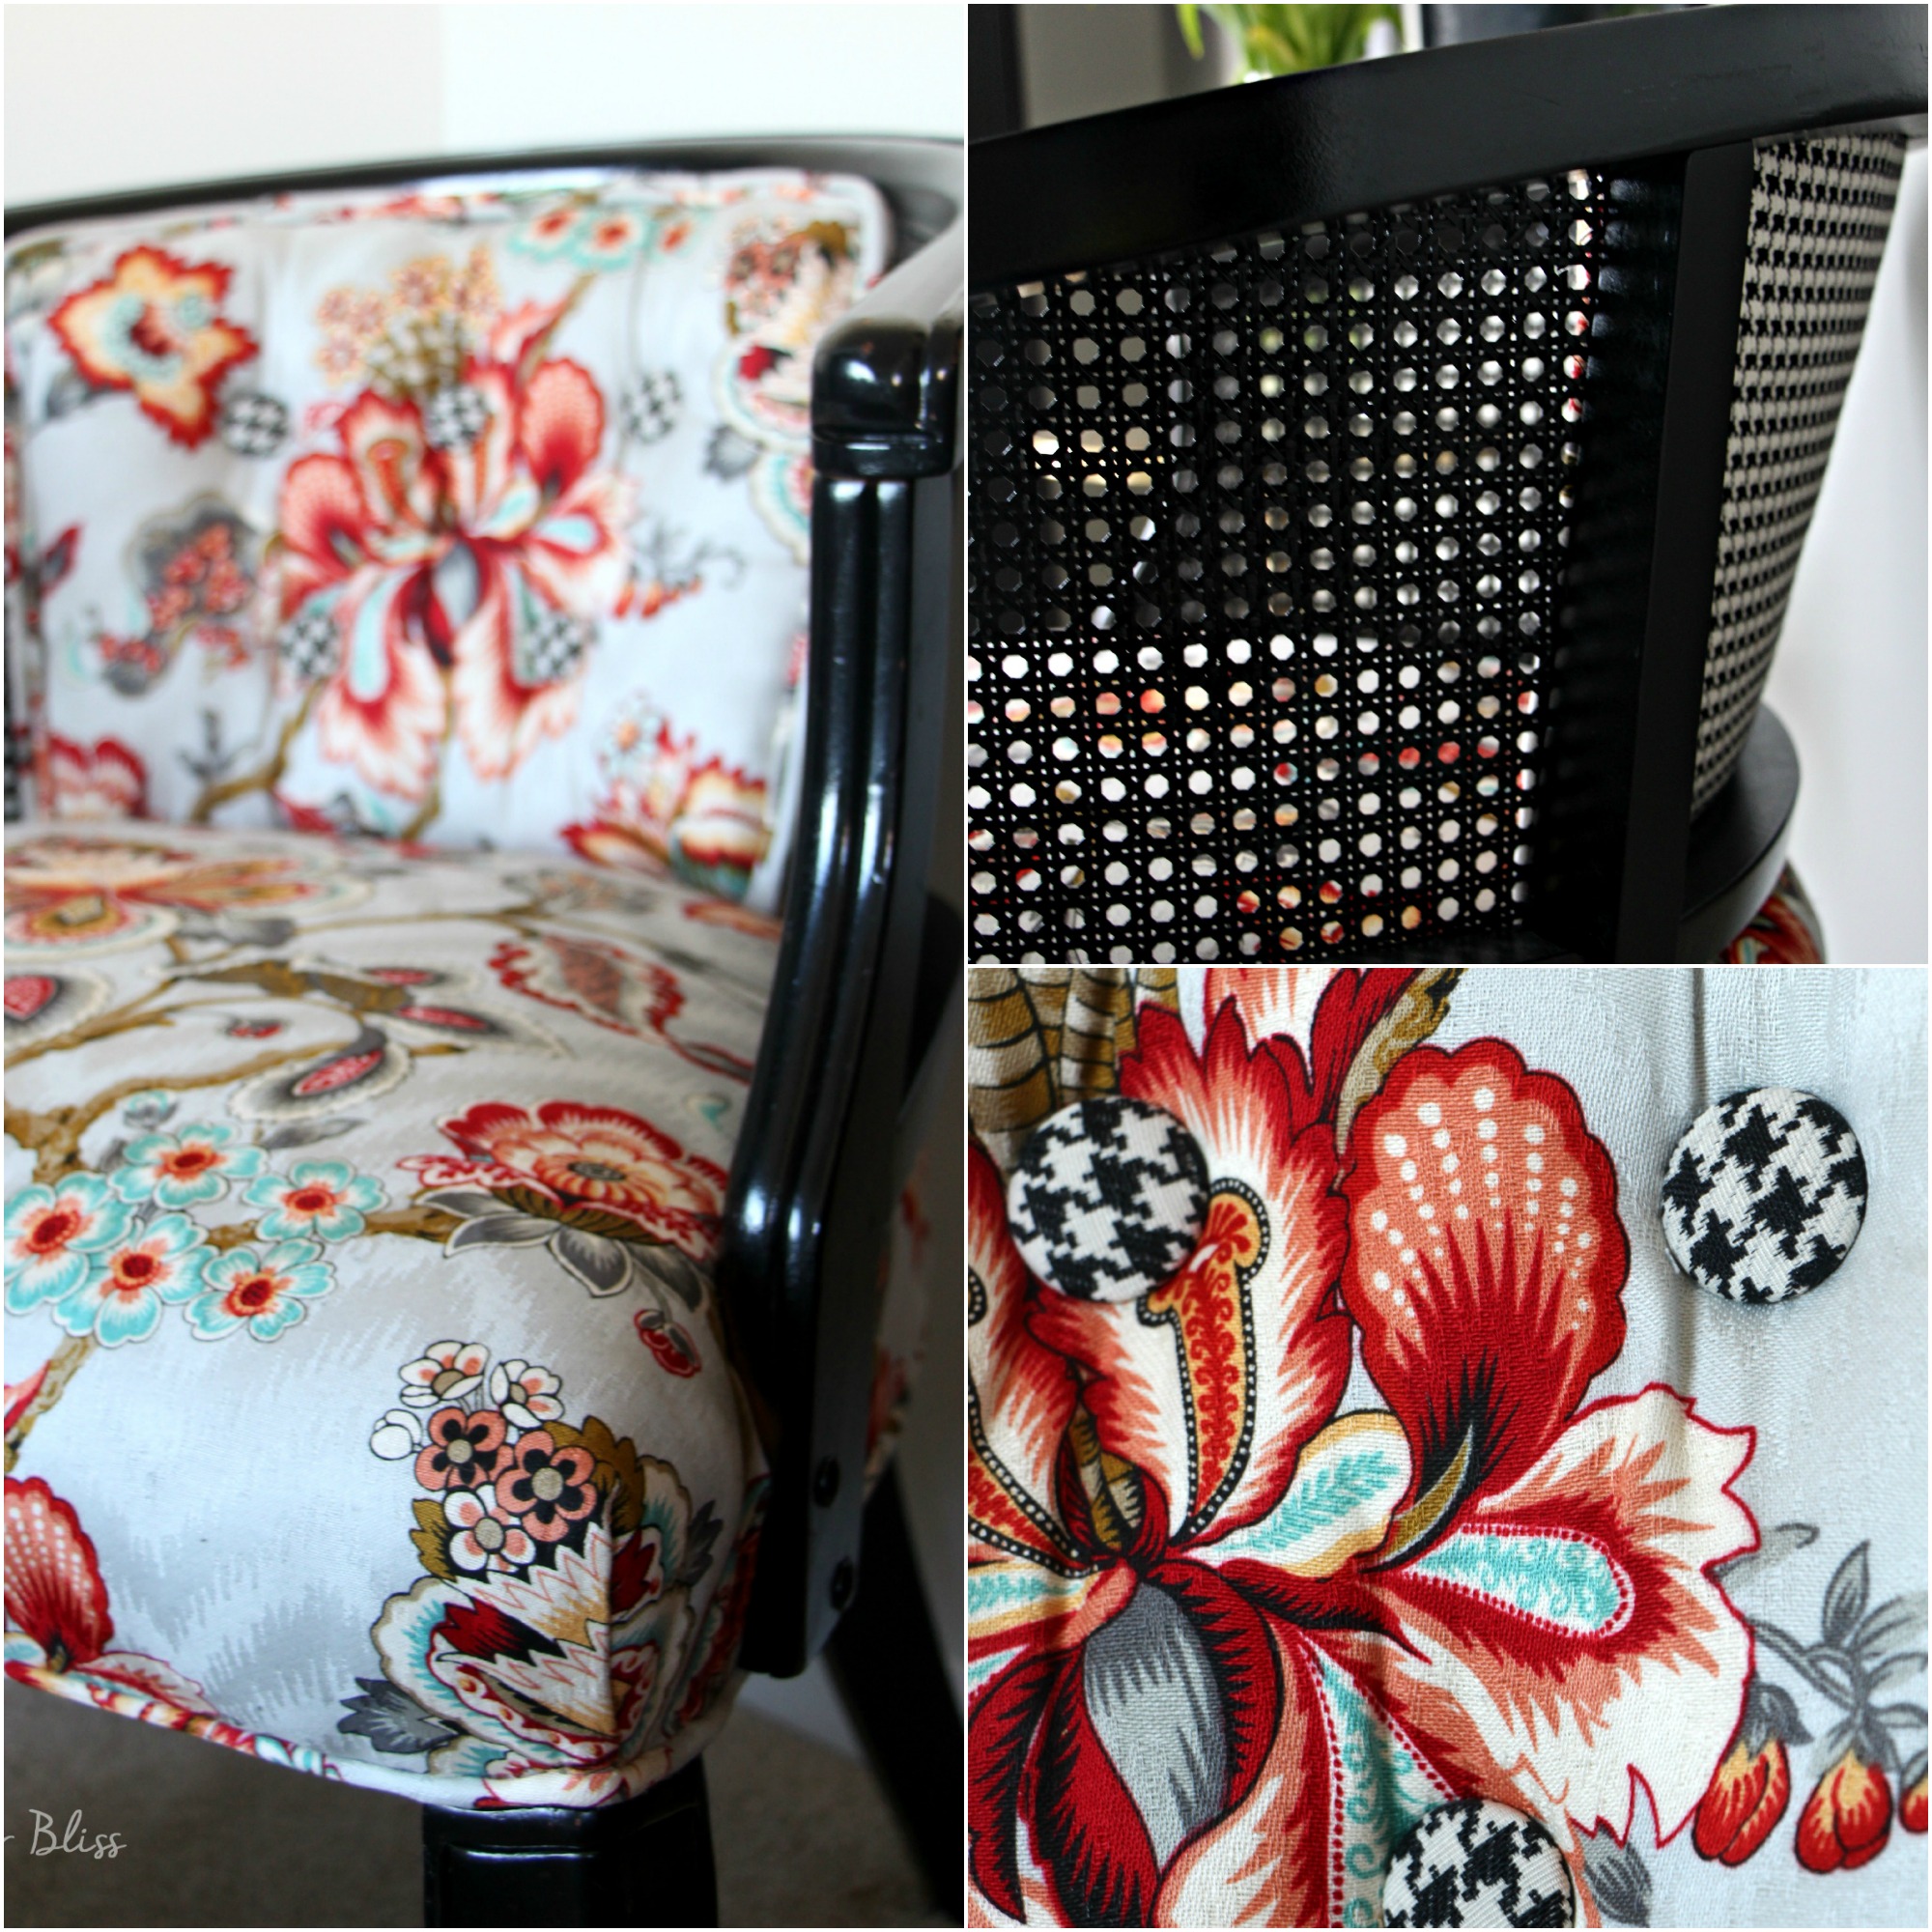 cane chair makeover - floral and houndstooth fabric - Guestroom revamp - This is our Bliss